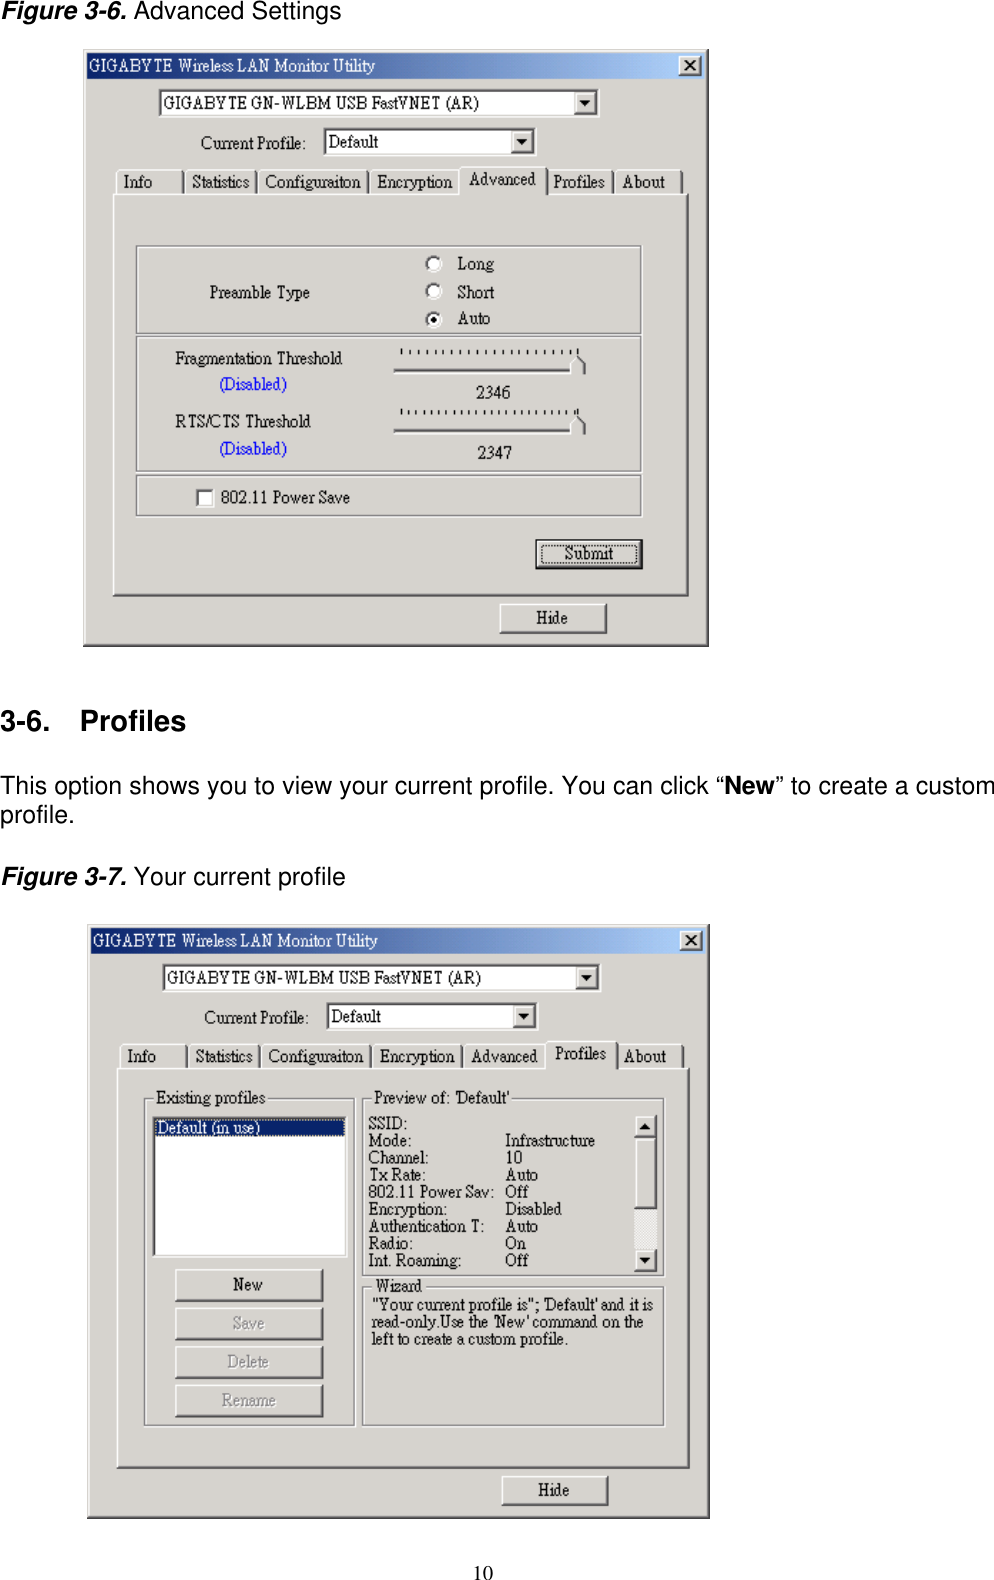 10   Figure 3-6. Advanced Settings     3-6.  Profiles  This option shows you to view your current profile. You can click “New” to create a custom profile.  Figure 3-7. Your current profile   